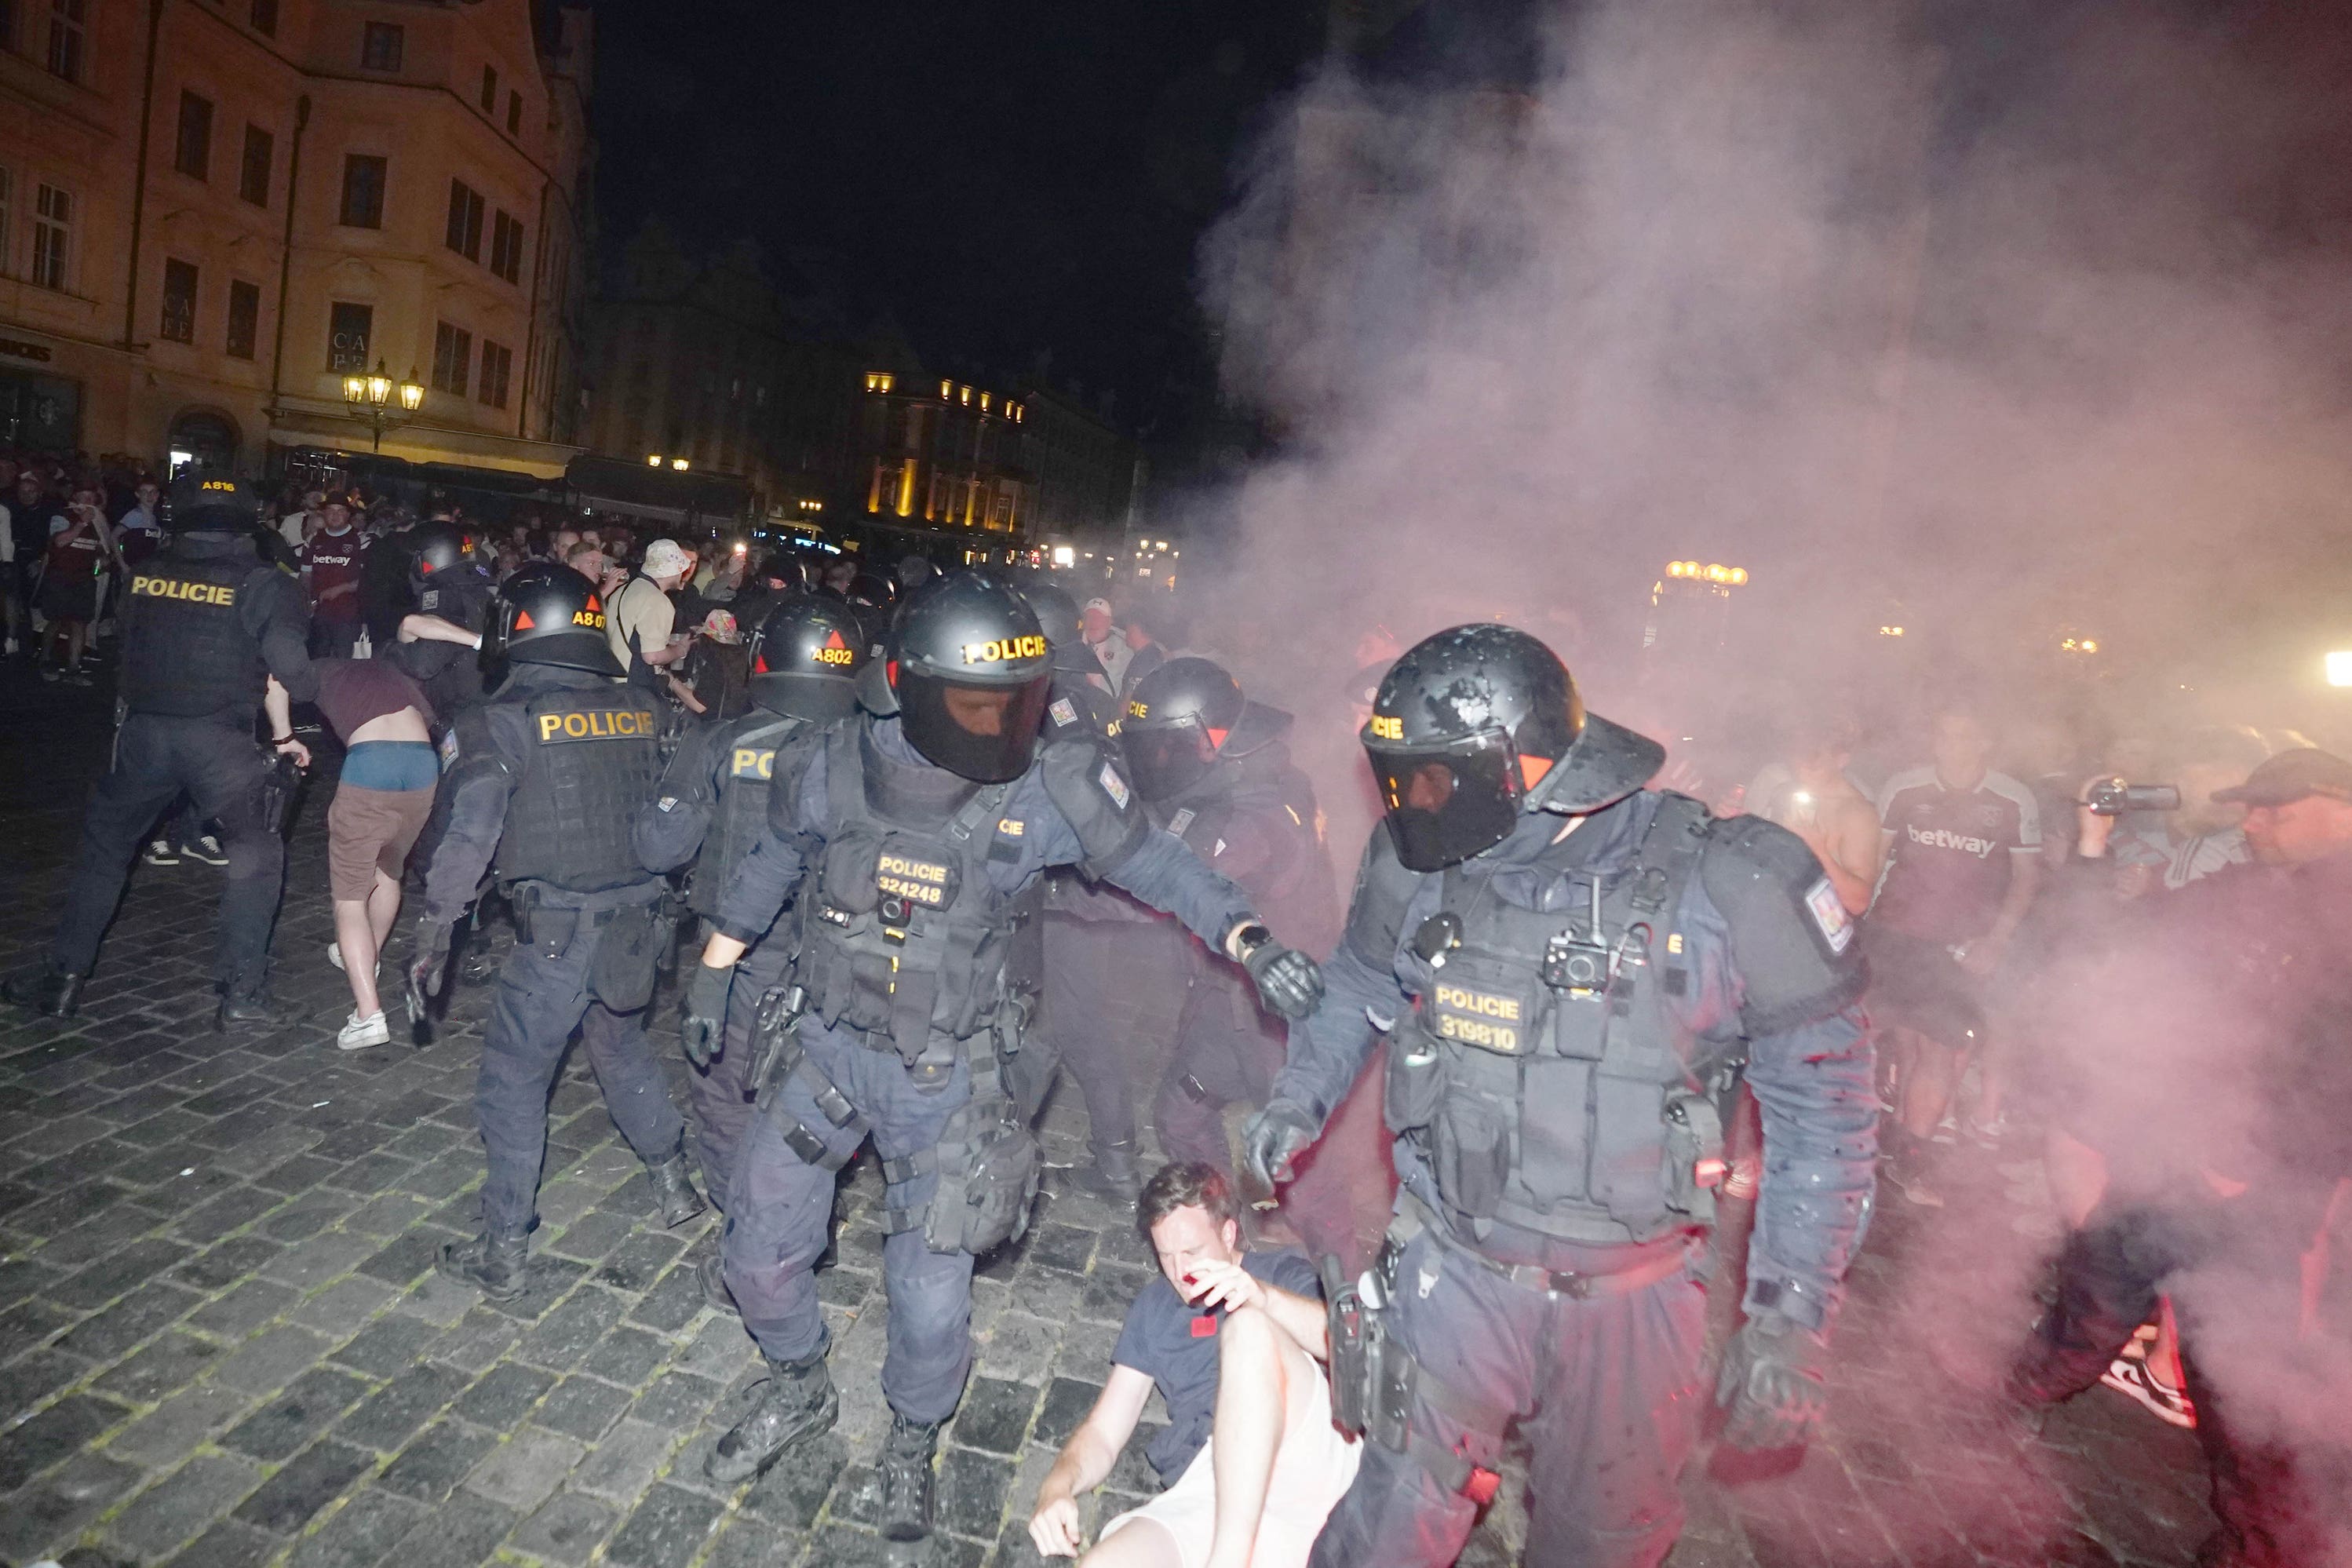 West Ham fans clashed with local police in Prague